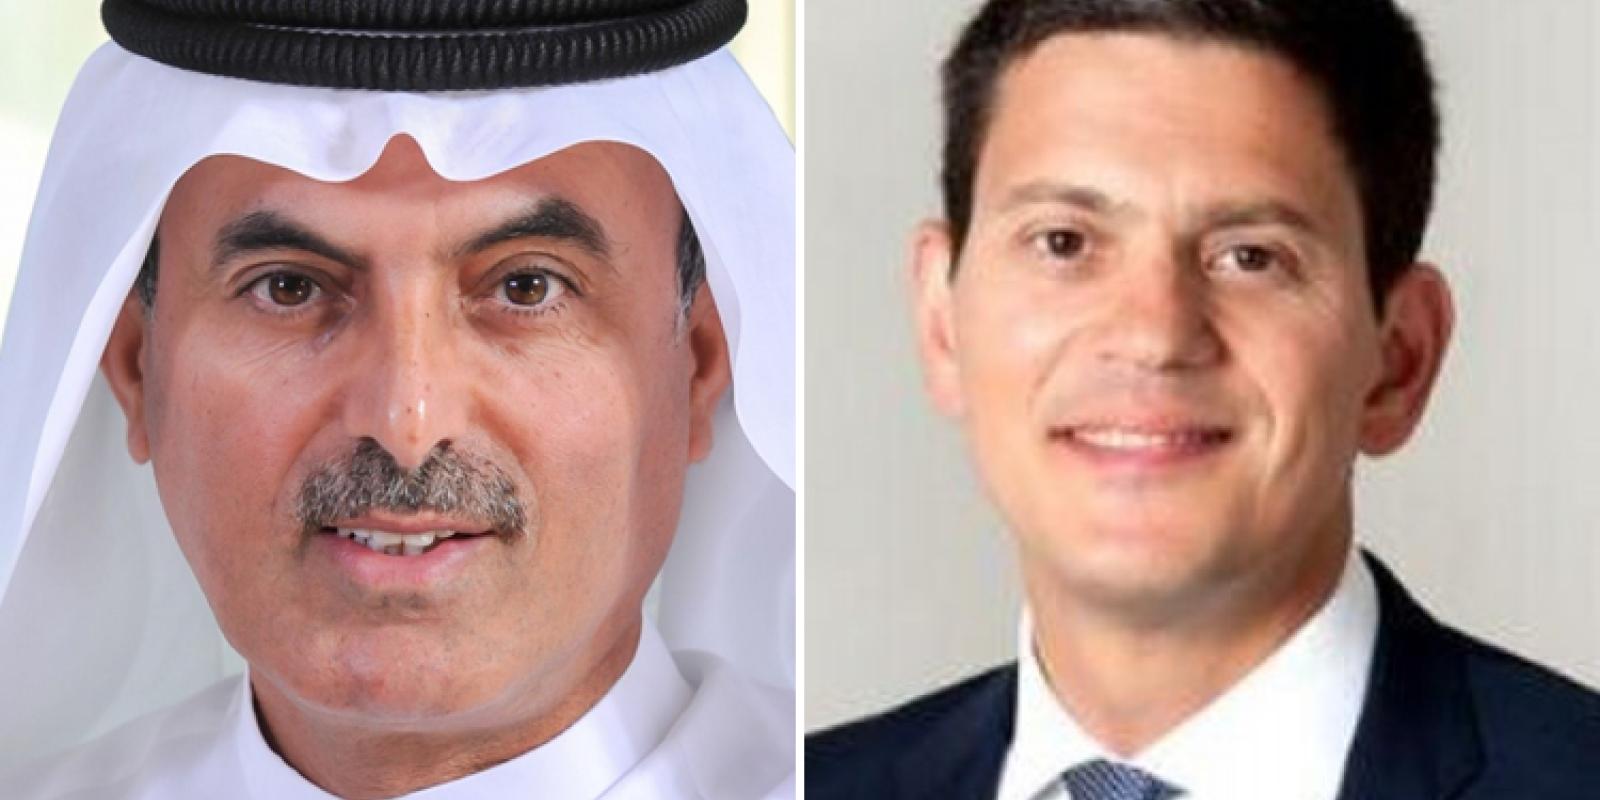 Abdul Aziz Al Ghurair and David Miliband will speak at this year’s undergraduate and graduate commencement ceremonies, respectively, and will receive honorary degrees from the University.